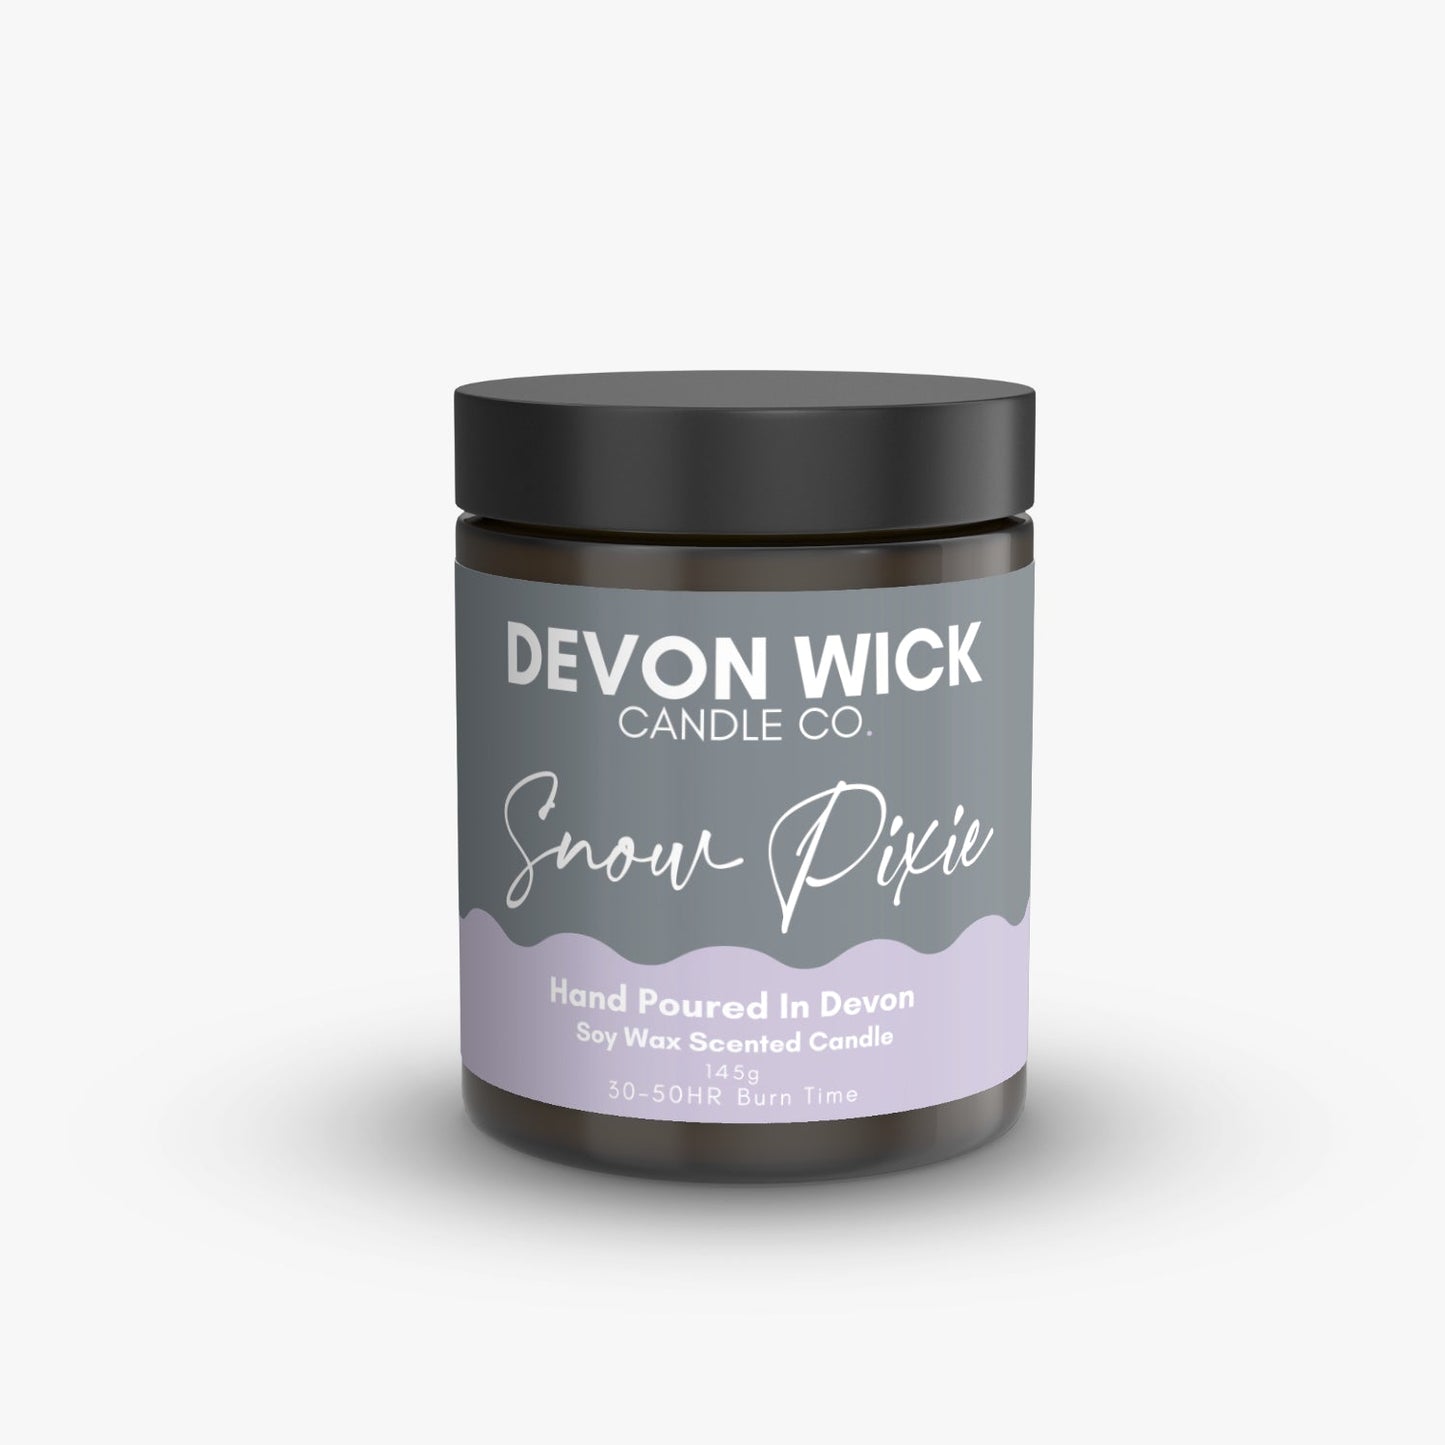 Devon Wick Candle Co. Limited Snow Pixie Soy Wax Candle